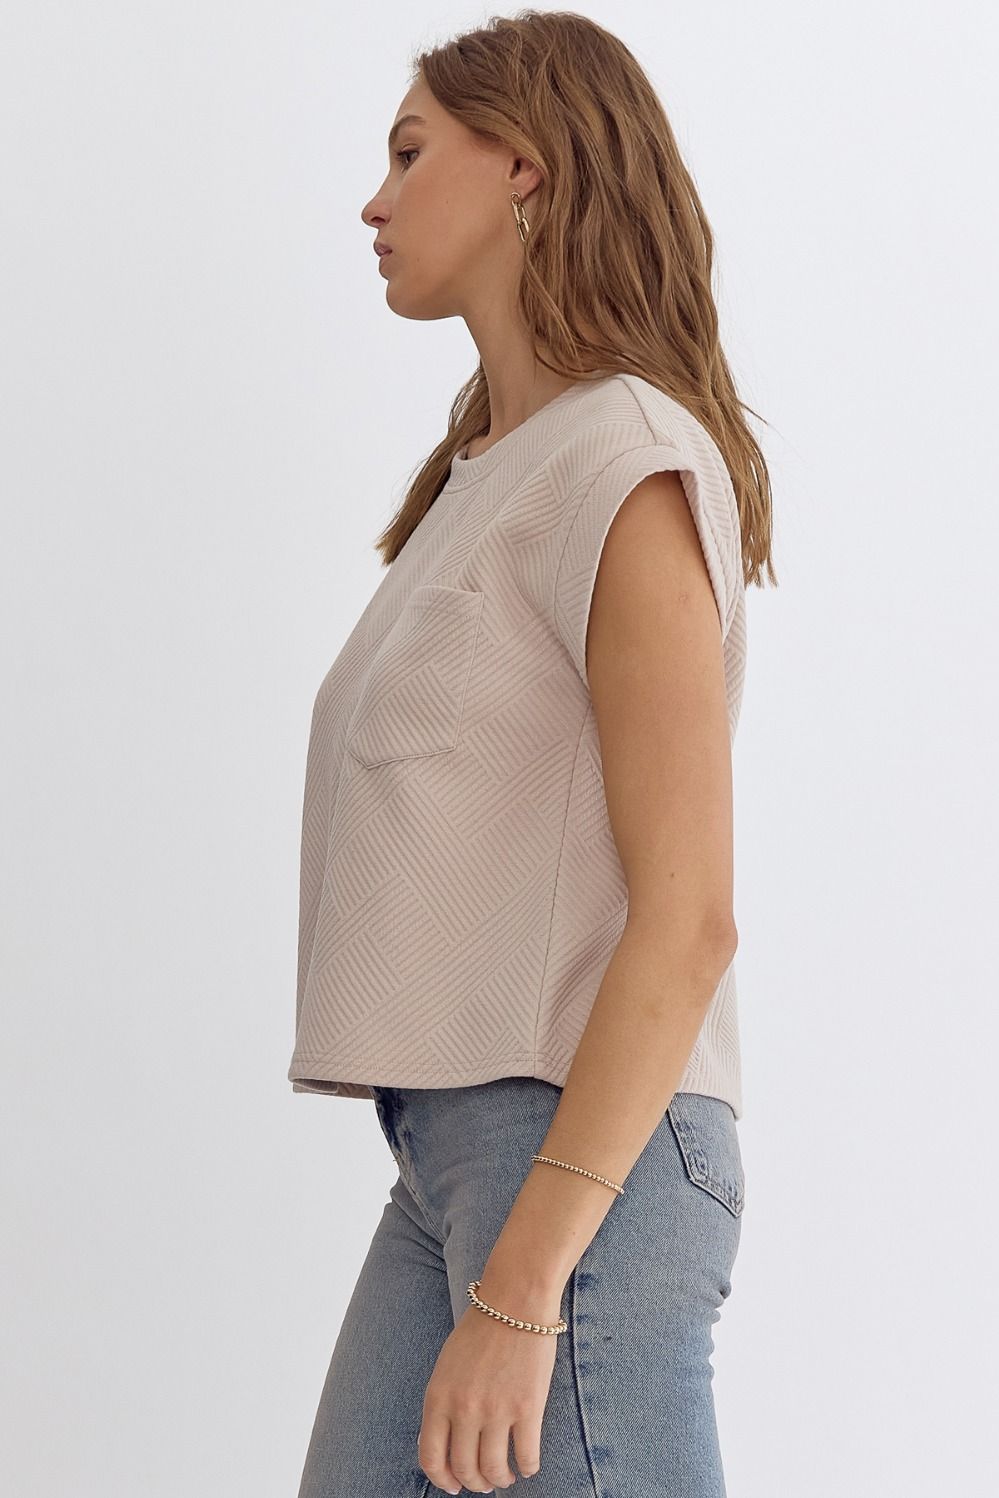 Taupe Textured Top